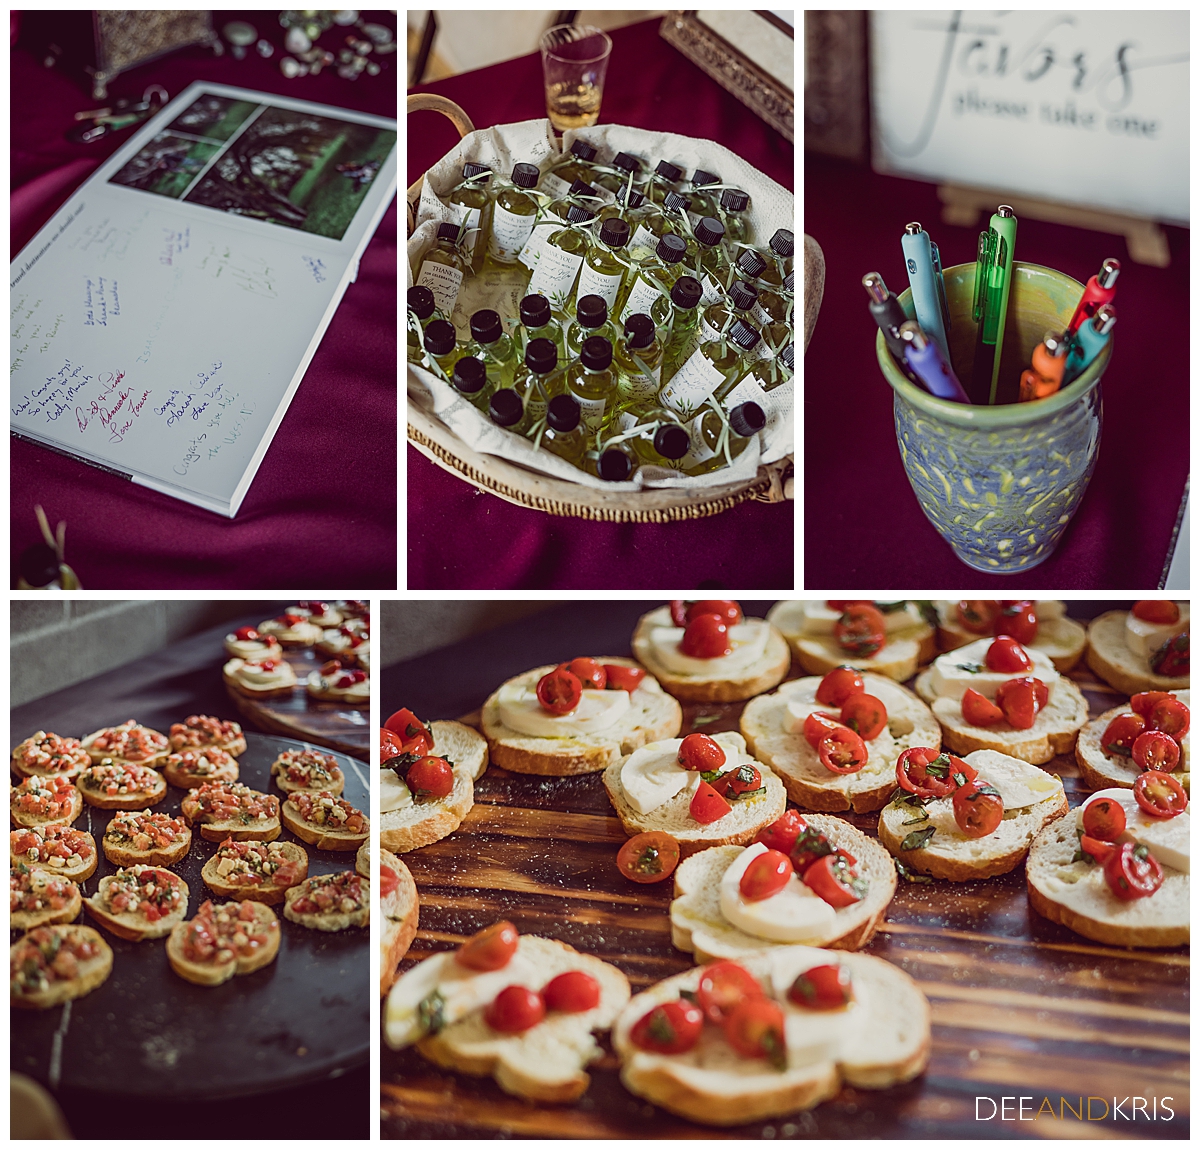 Five images of details: Top right of guest book, top middle of wedding favors of tiny wine bottles, top right of colored pens for guest book. Bottom two images of canapés.